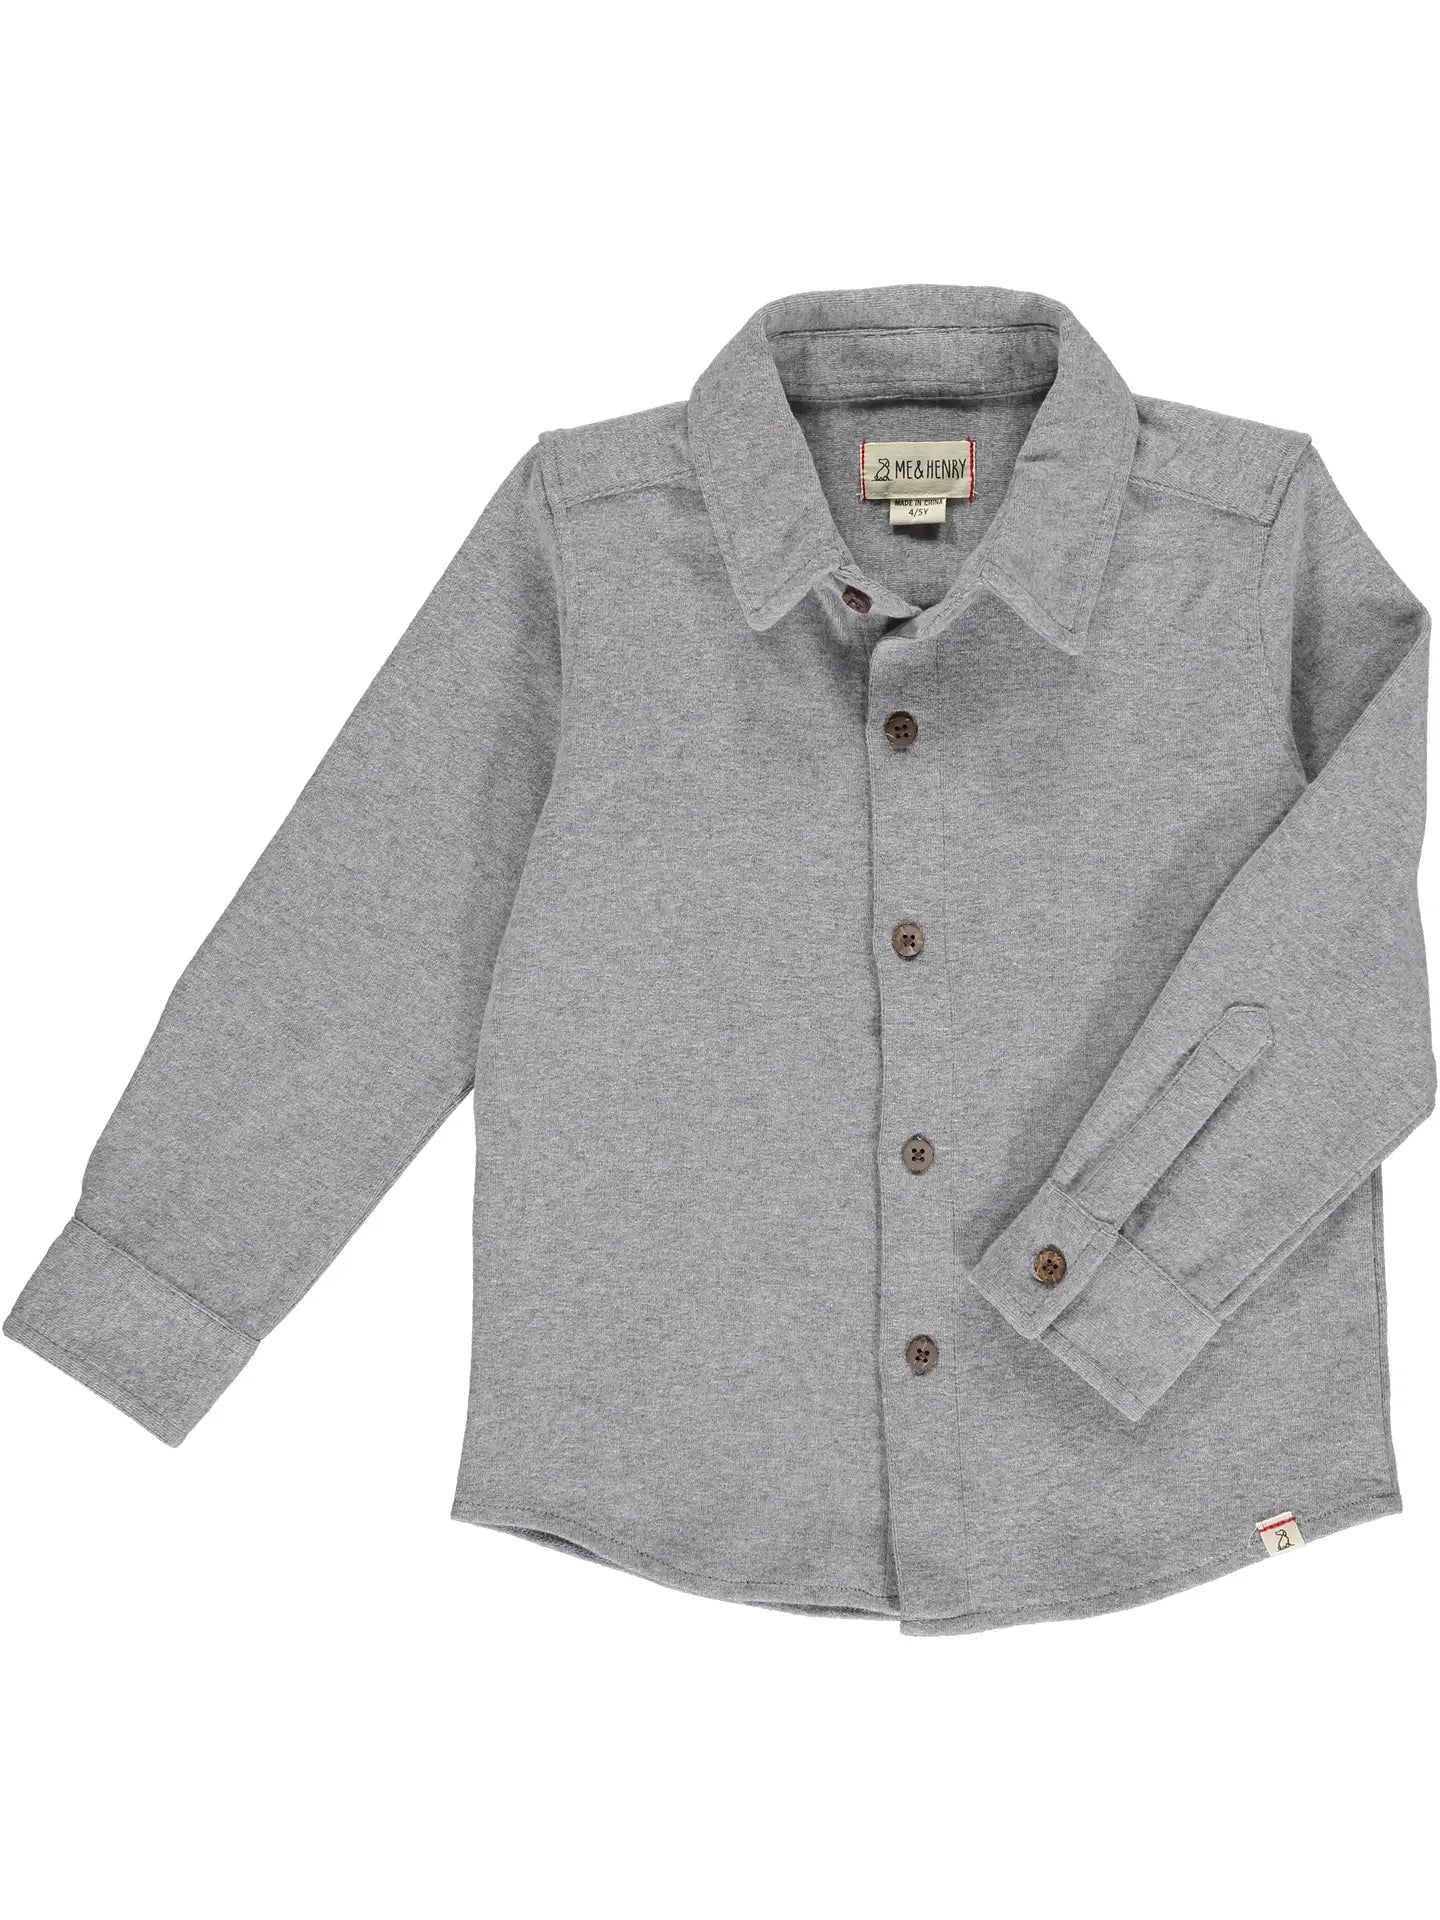 me and Henry grey cotton Columbia jersey collared shirt long sleeve